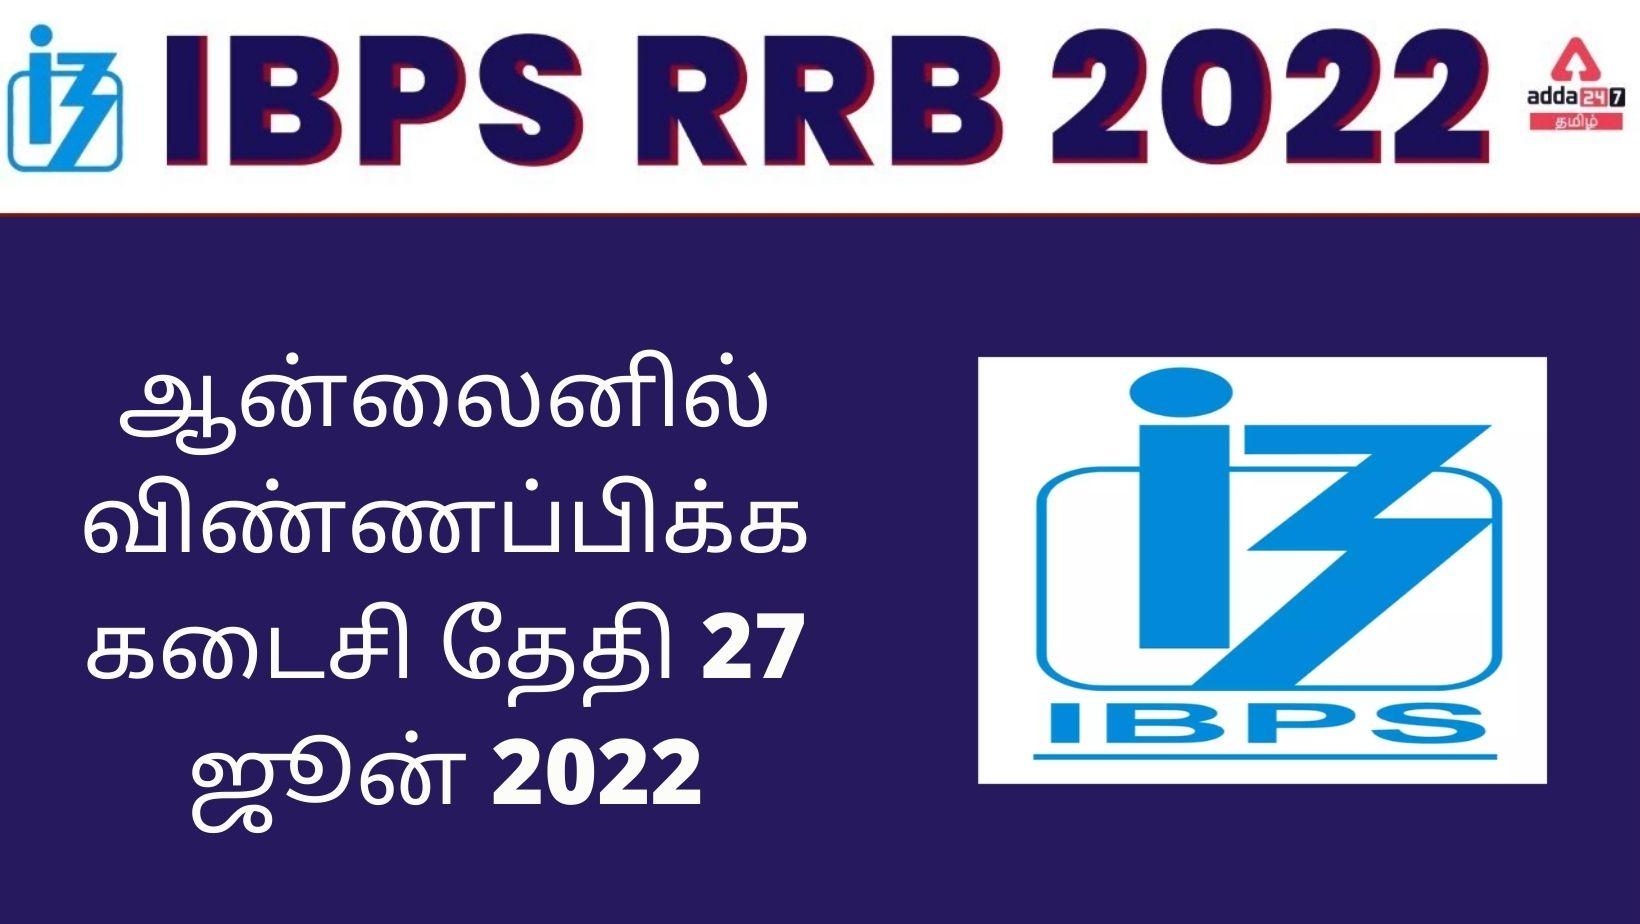 IBPS RRB apply online last date